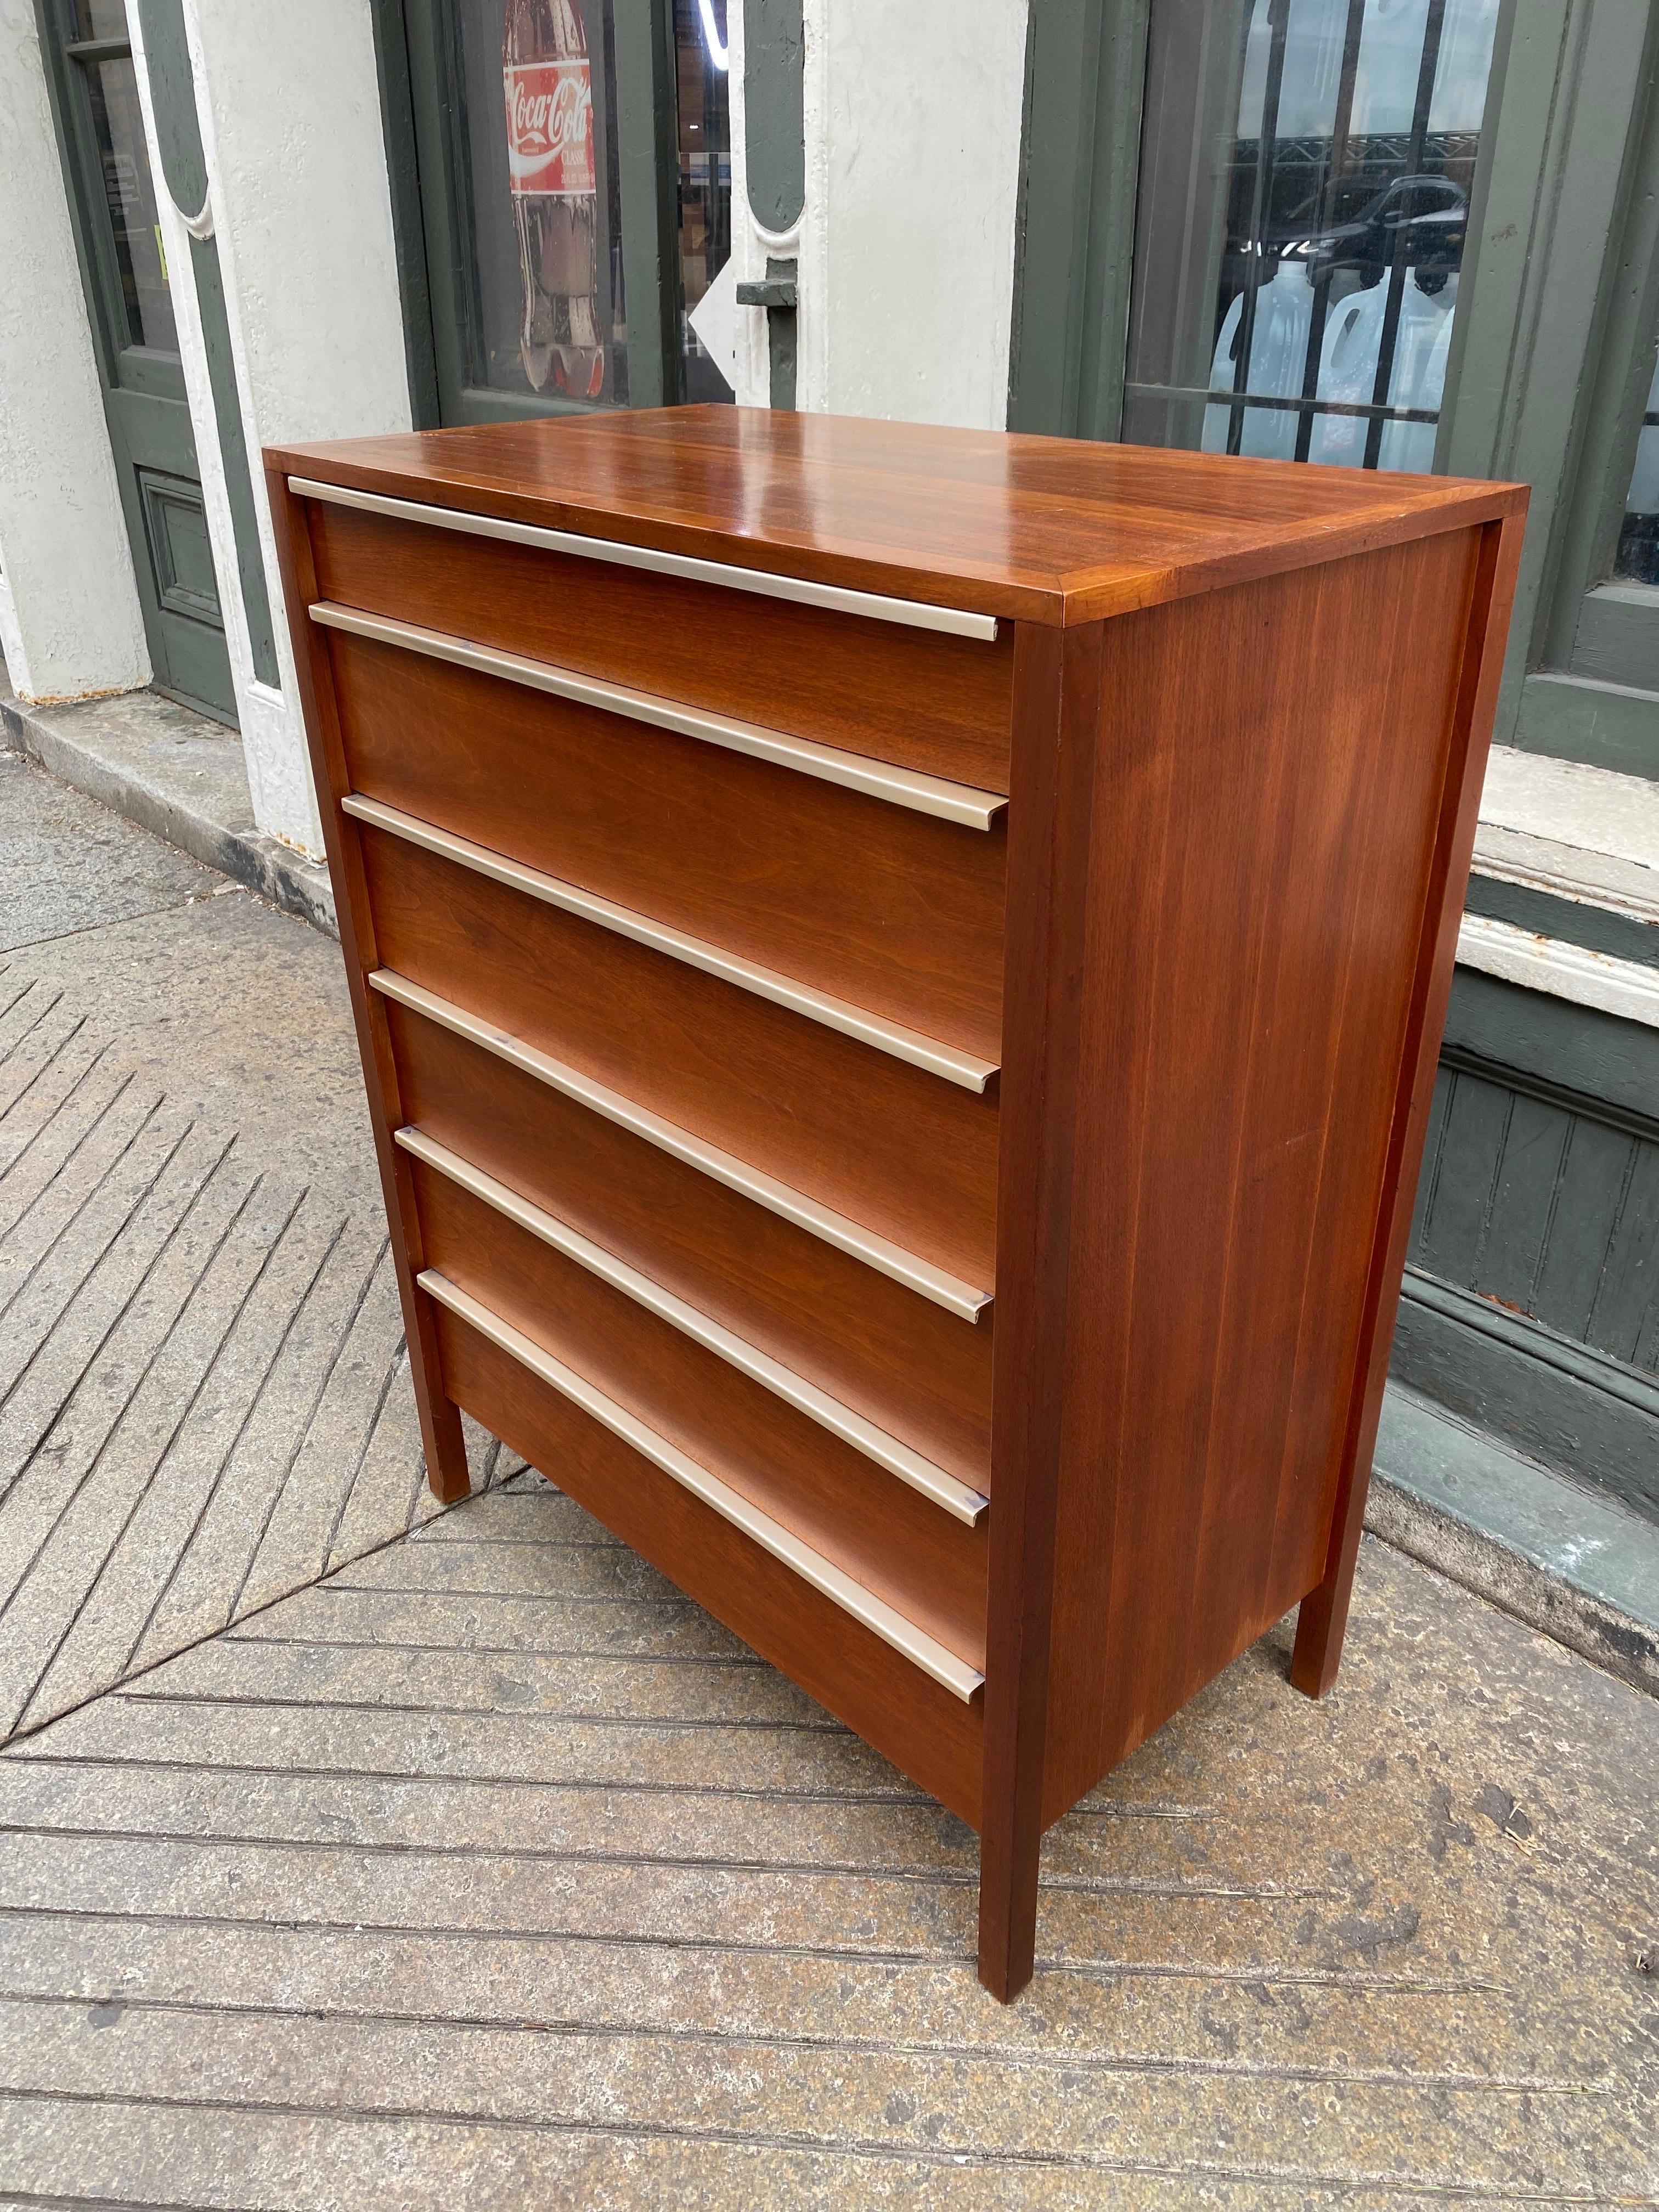 William Pahlmann for Hastings furniture tall dresser. Walnut with Aluminum pulls that run across the top of each drawer. Listed separately 2 matching low dressers and nightstands. Original condition! Aluminum handles show wear at tops. All handles